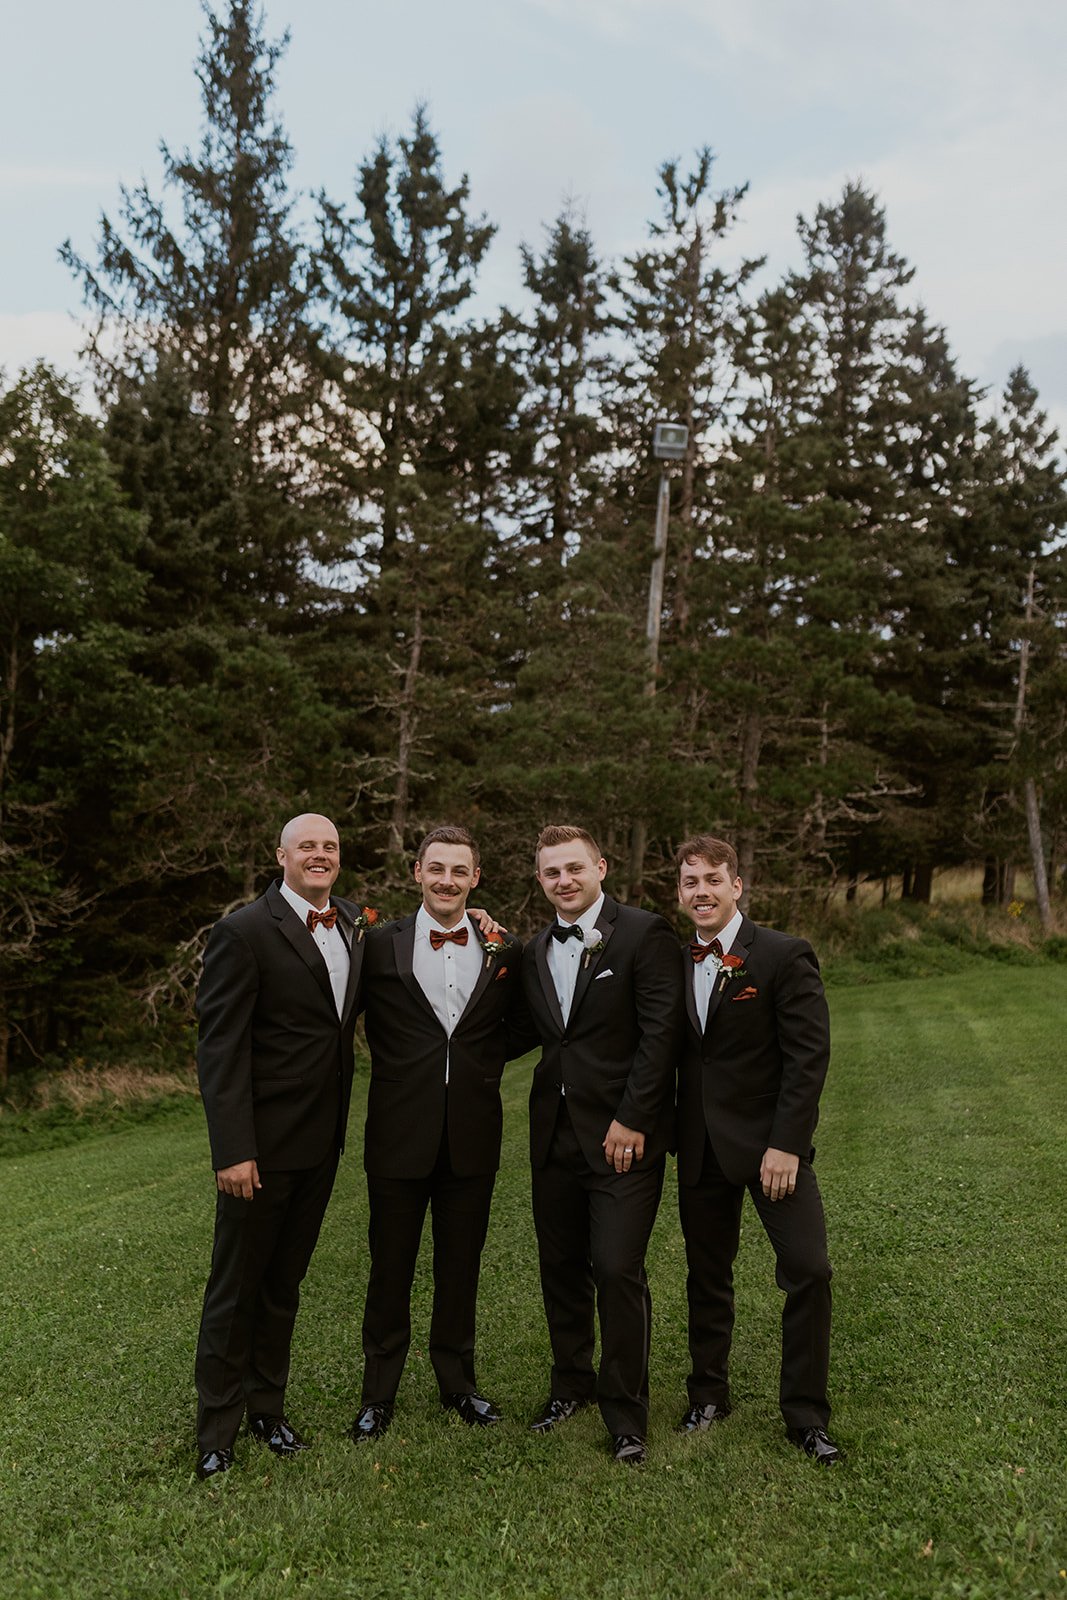 Groomsmen stand together smiling with lush green trees as their background. 